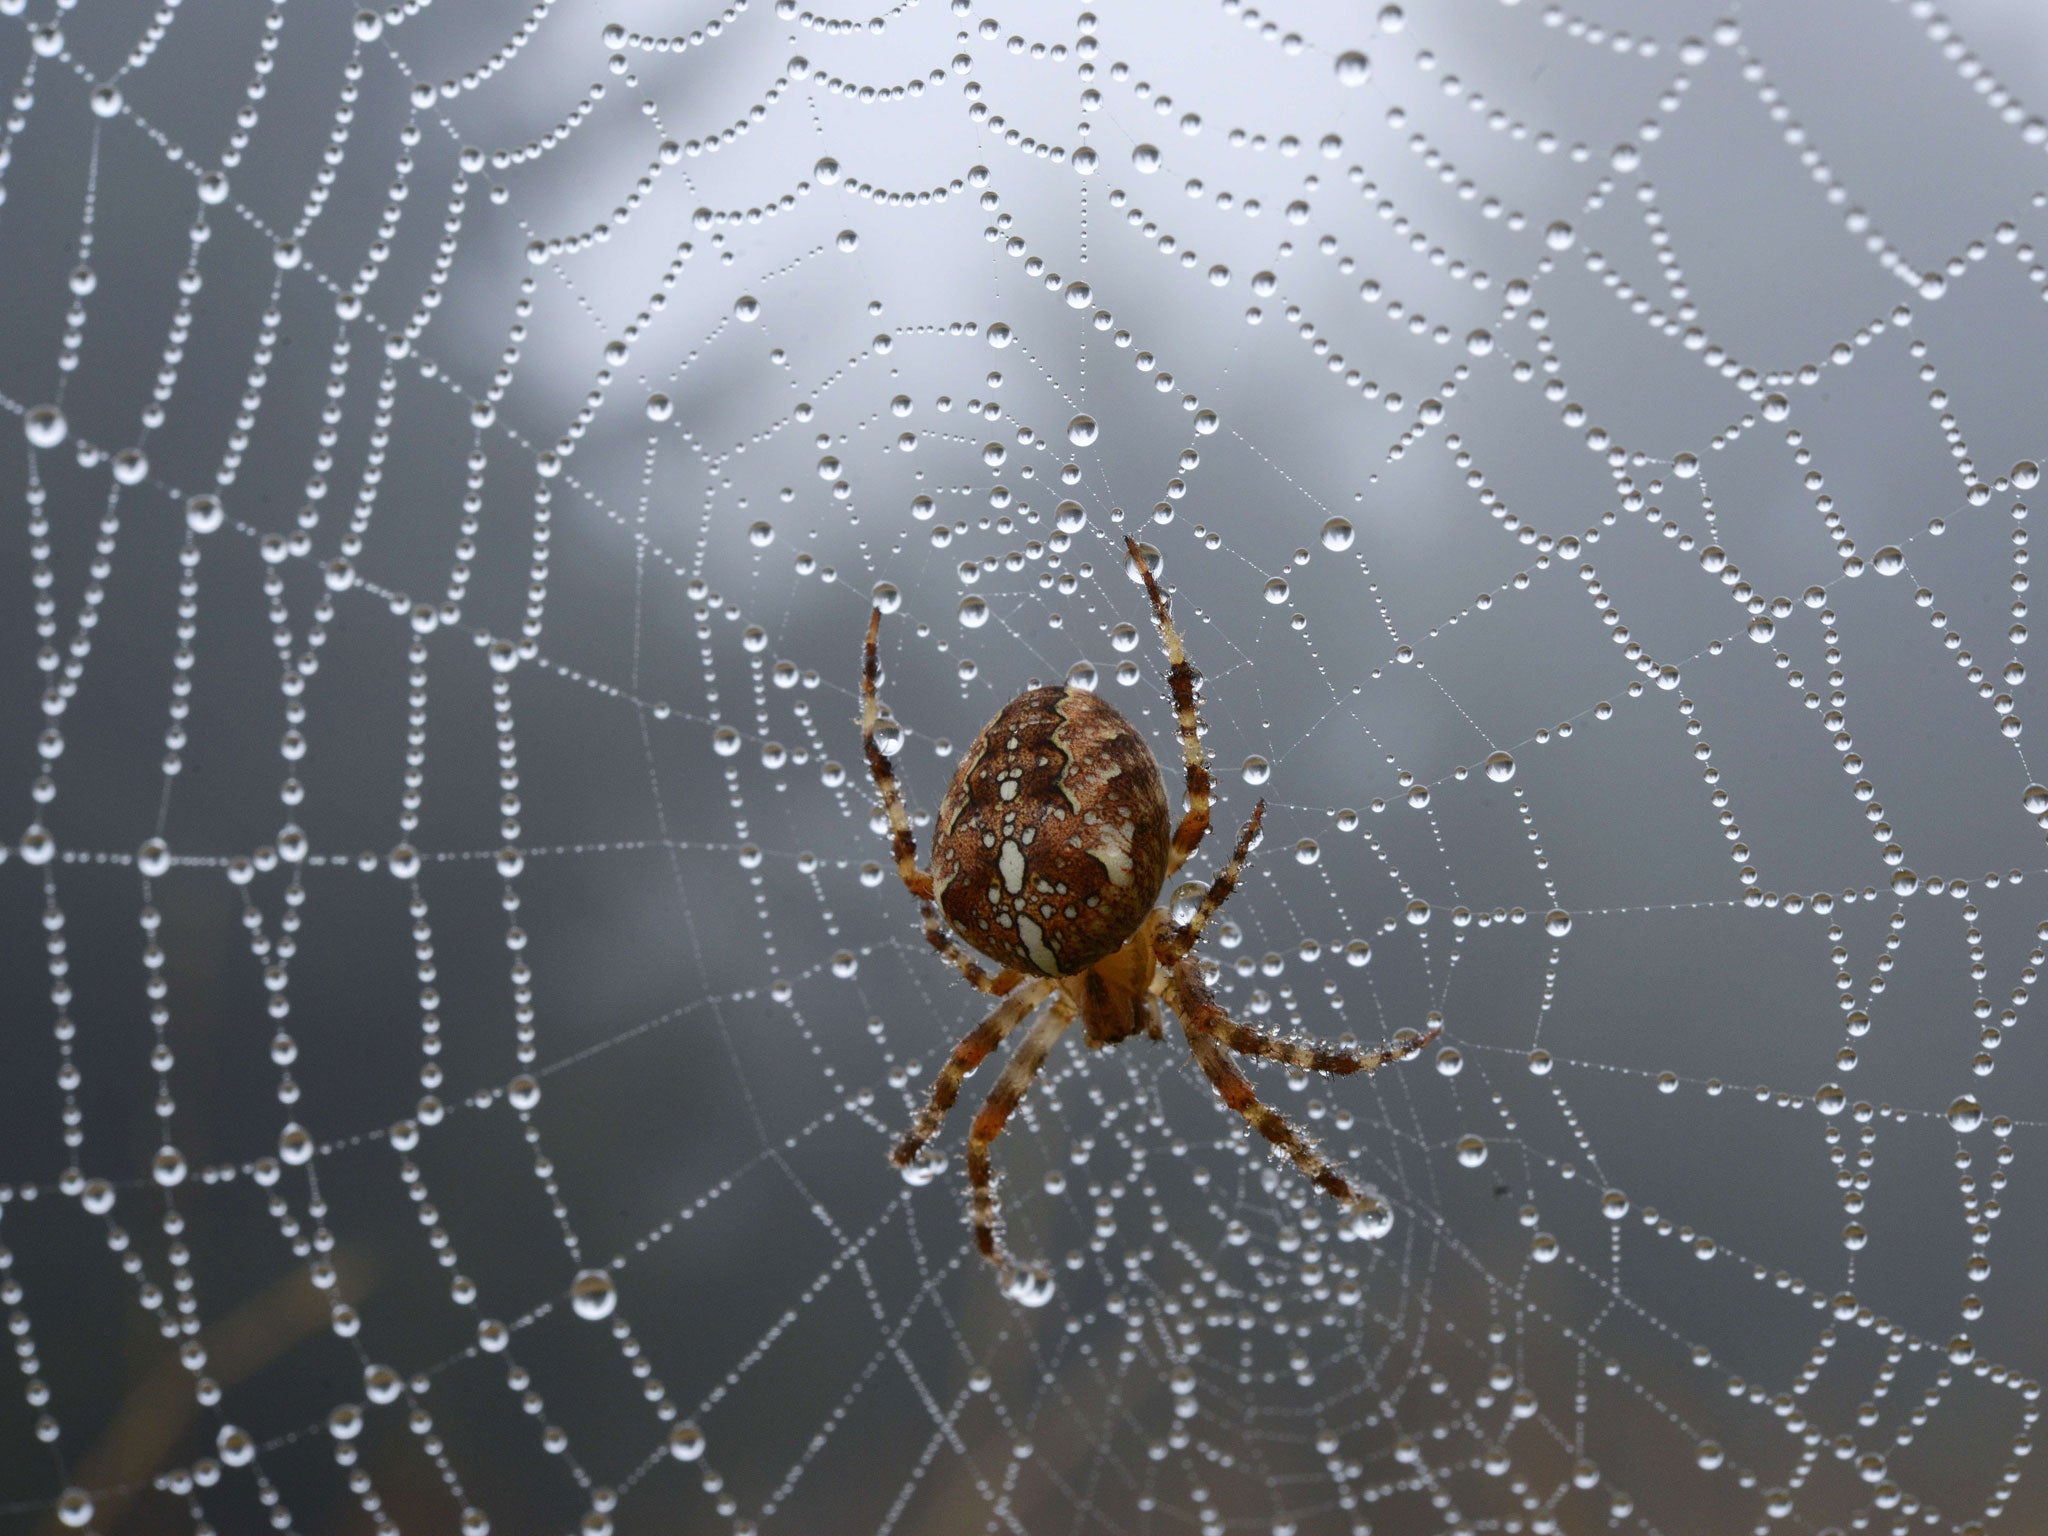 Large sheets of dense and gooey spider webs have appeared following recent heavy rain